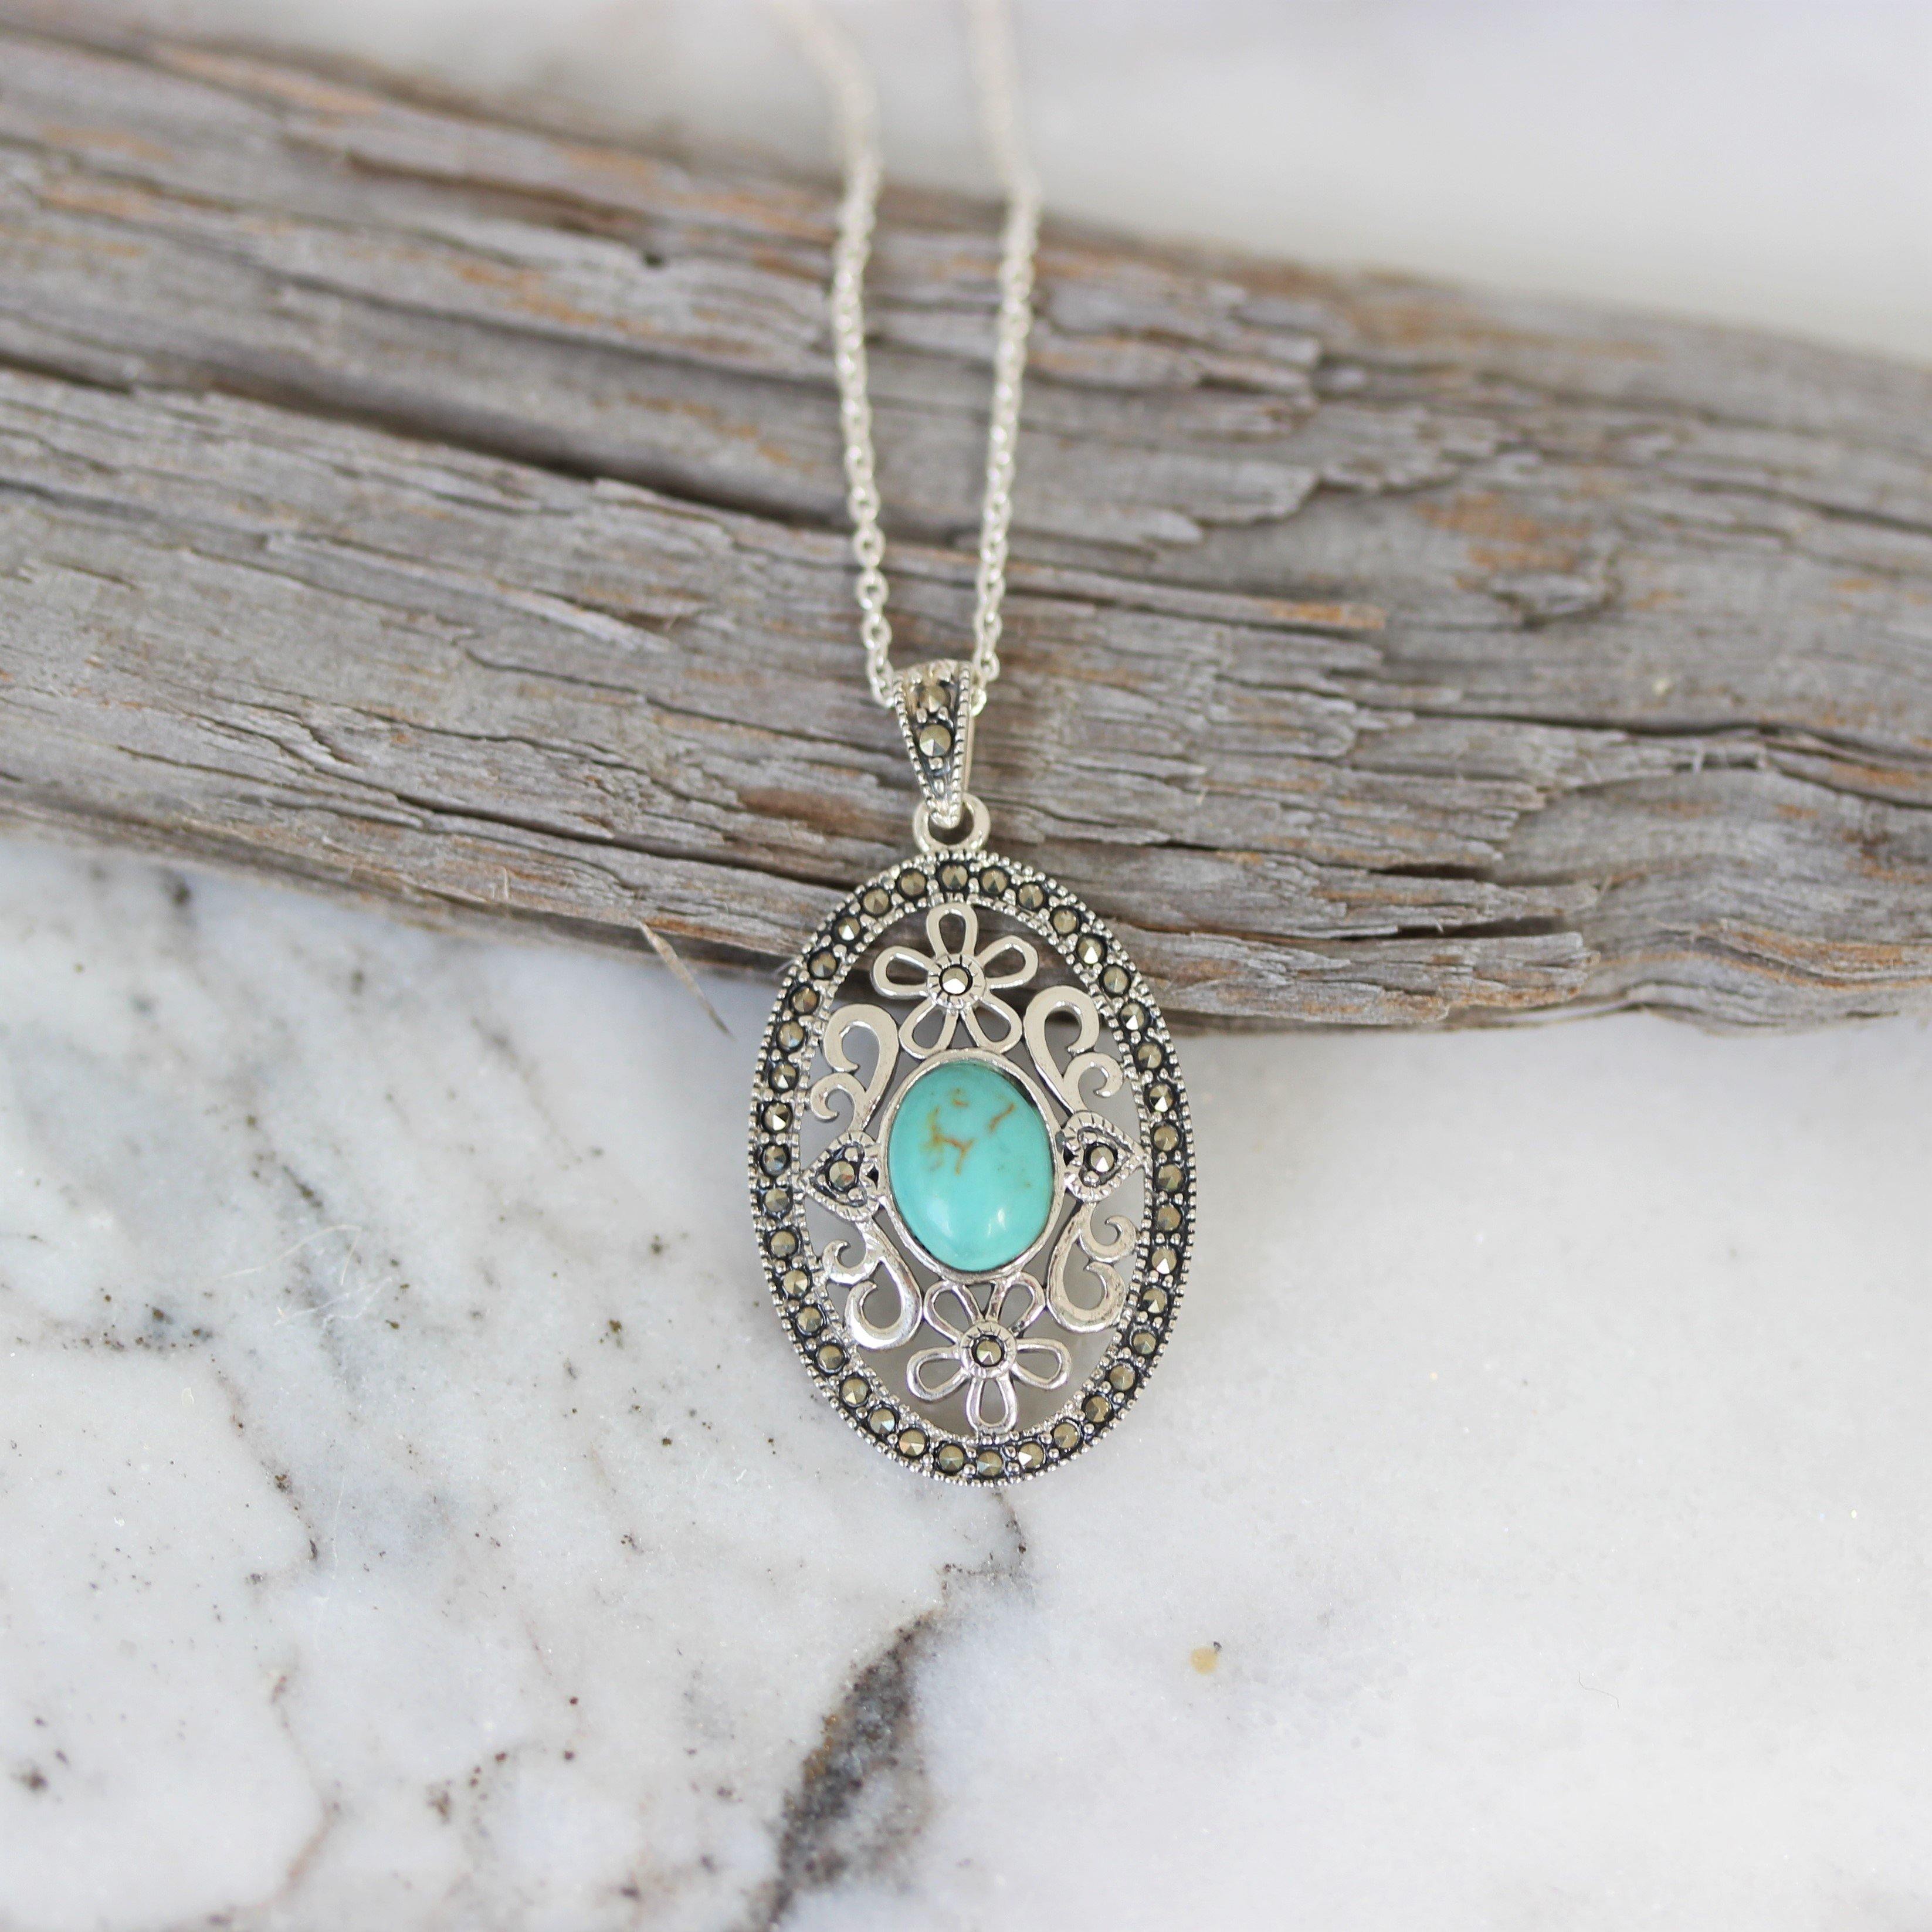 Sterling Silver Marcasite & Turquoise Oval Pendant Necklace 42cm - STERLING SILVER DESIGNS